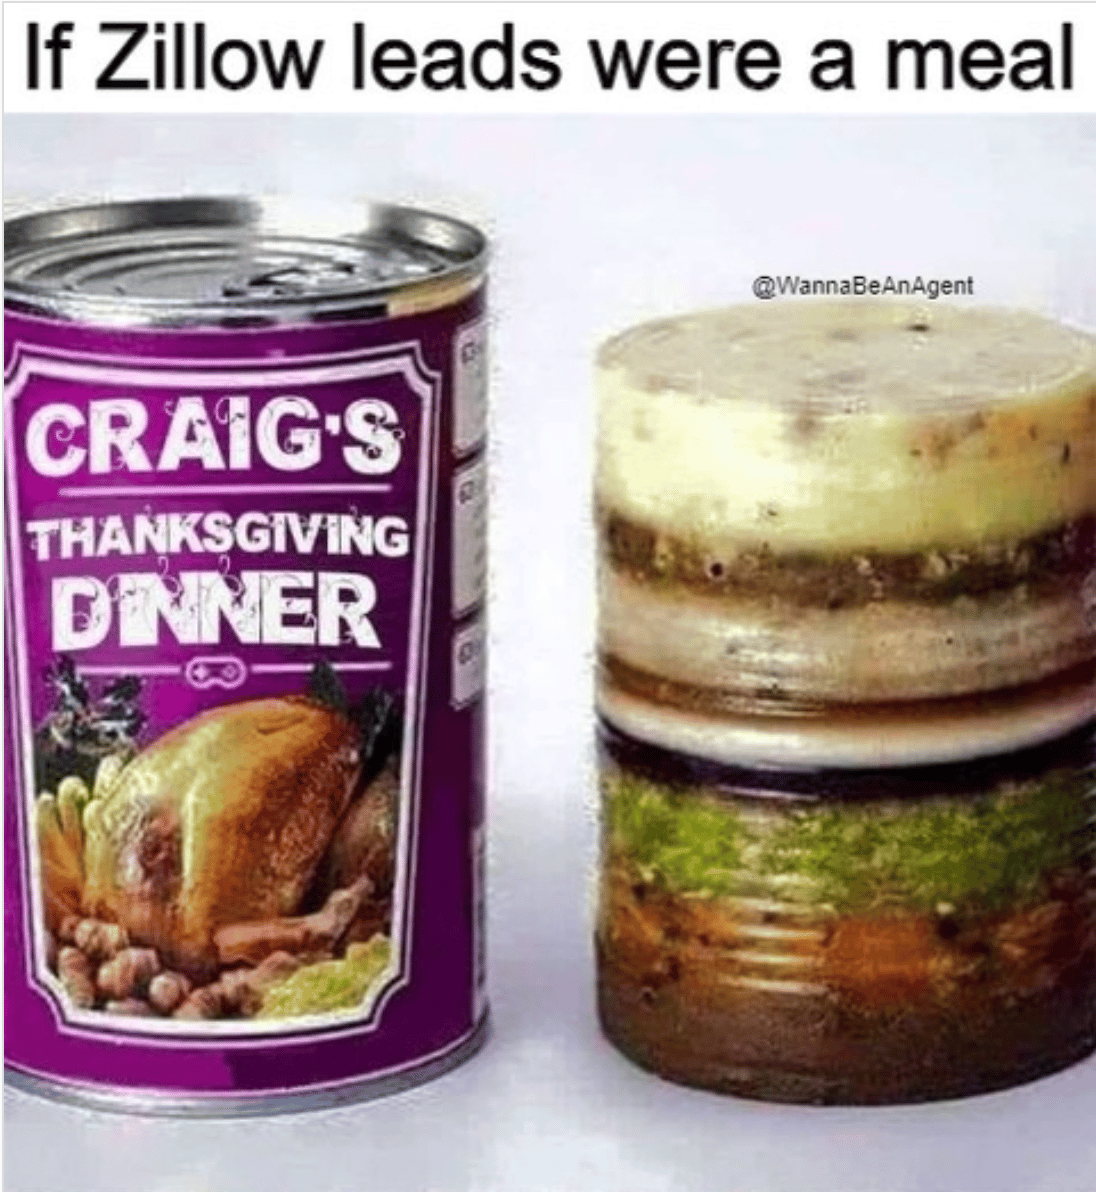 Zillow meme a Craigs Thanksgiving dinner in a can